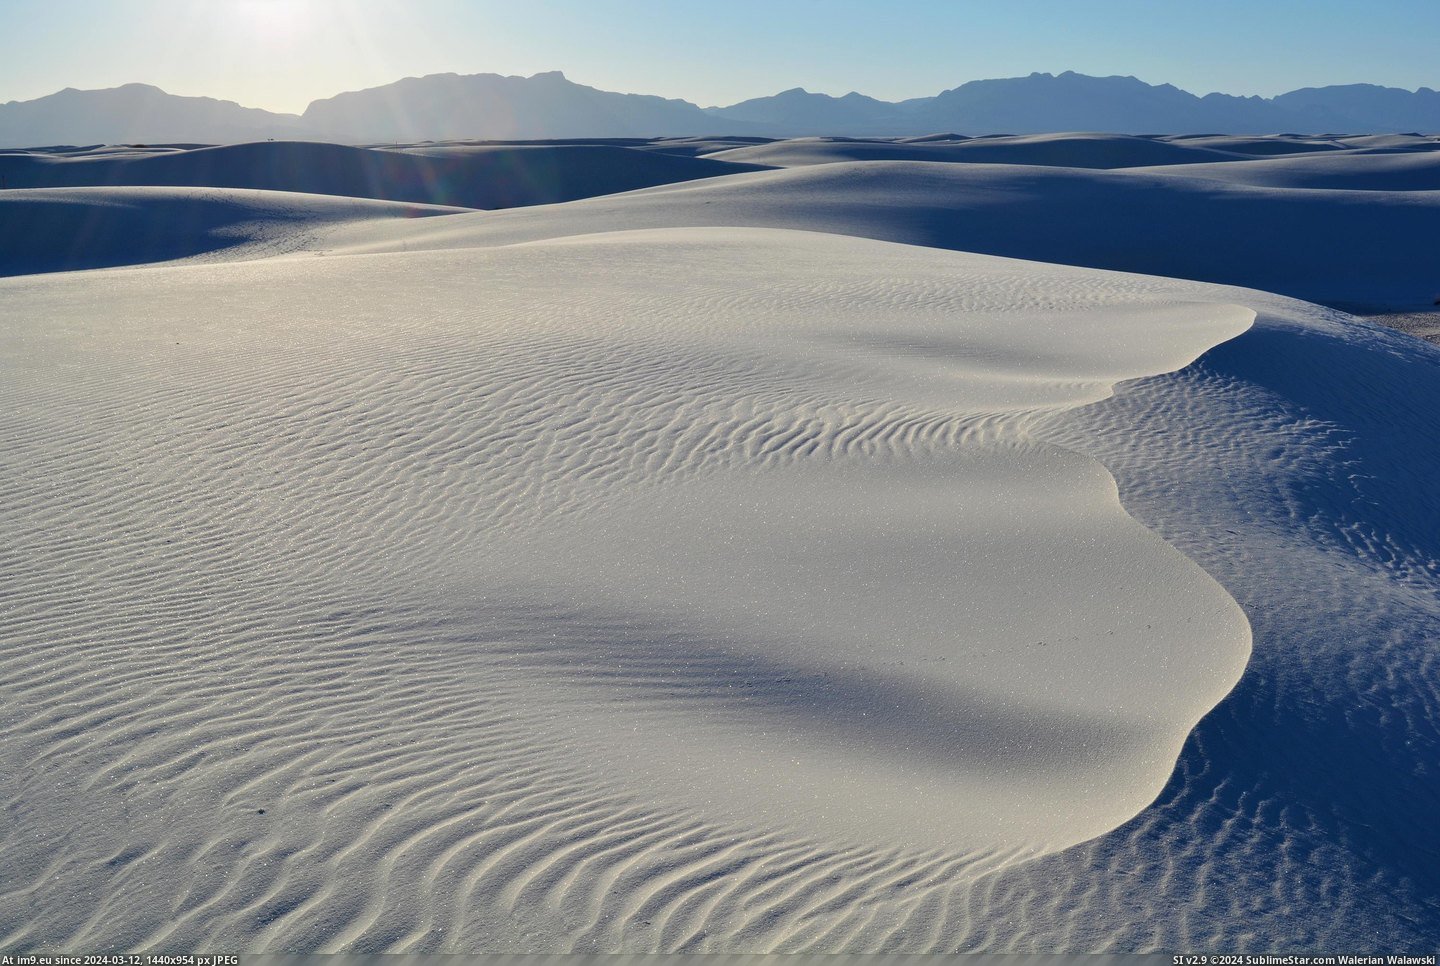 #White #Shot #3000x2000 #Sands #Nat #Monument #Hiking [Earthporn] Recent shot while hiking at White Sands Nat'l Monument, NM  [3000x2000] Pic. (Image of album My r/EARTHPORN favs))